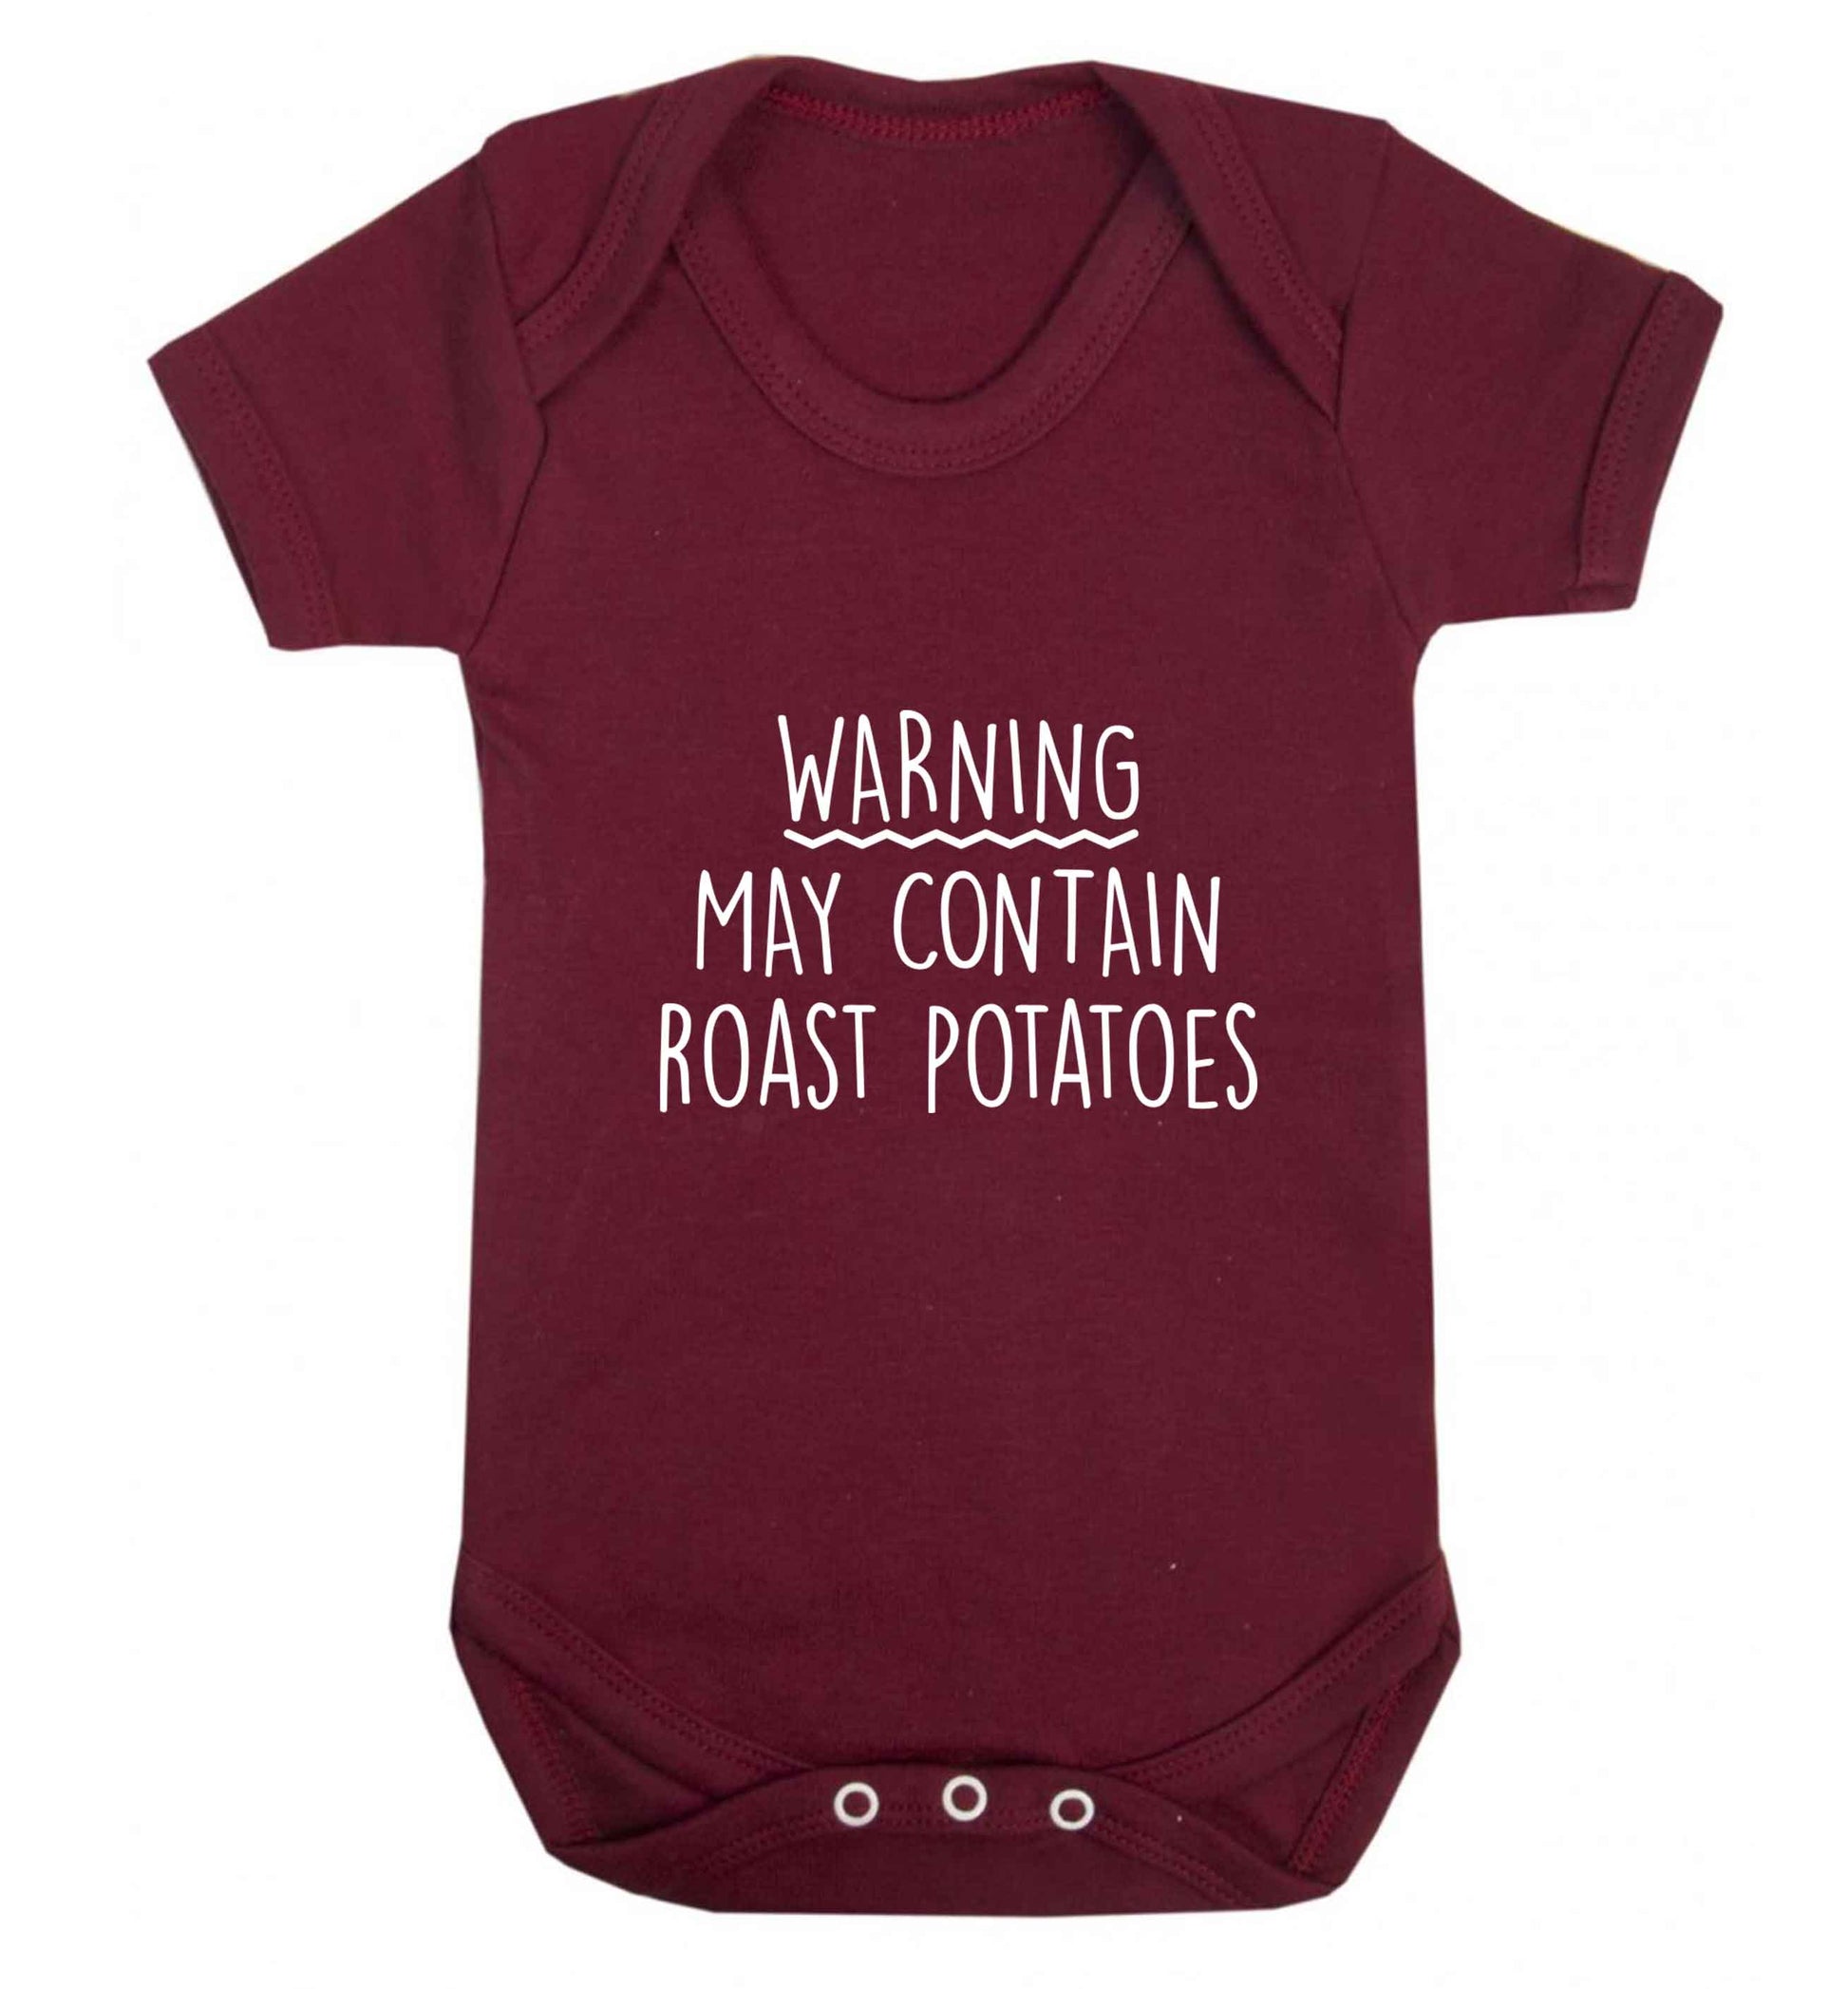 Warning may containg roast potatoes baby vest maroon 18-24 months